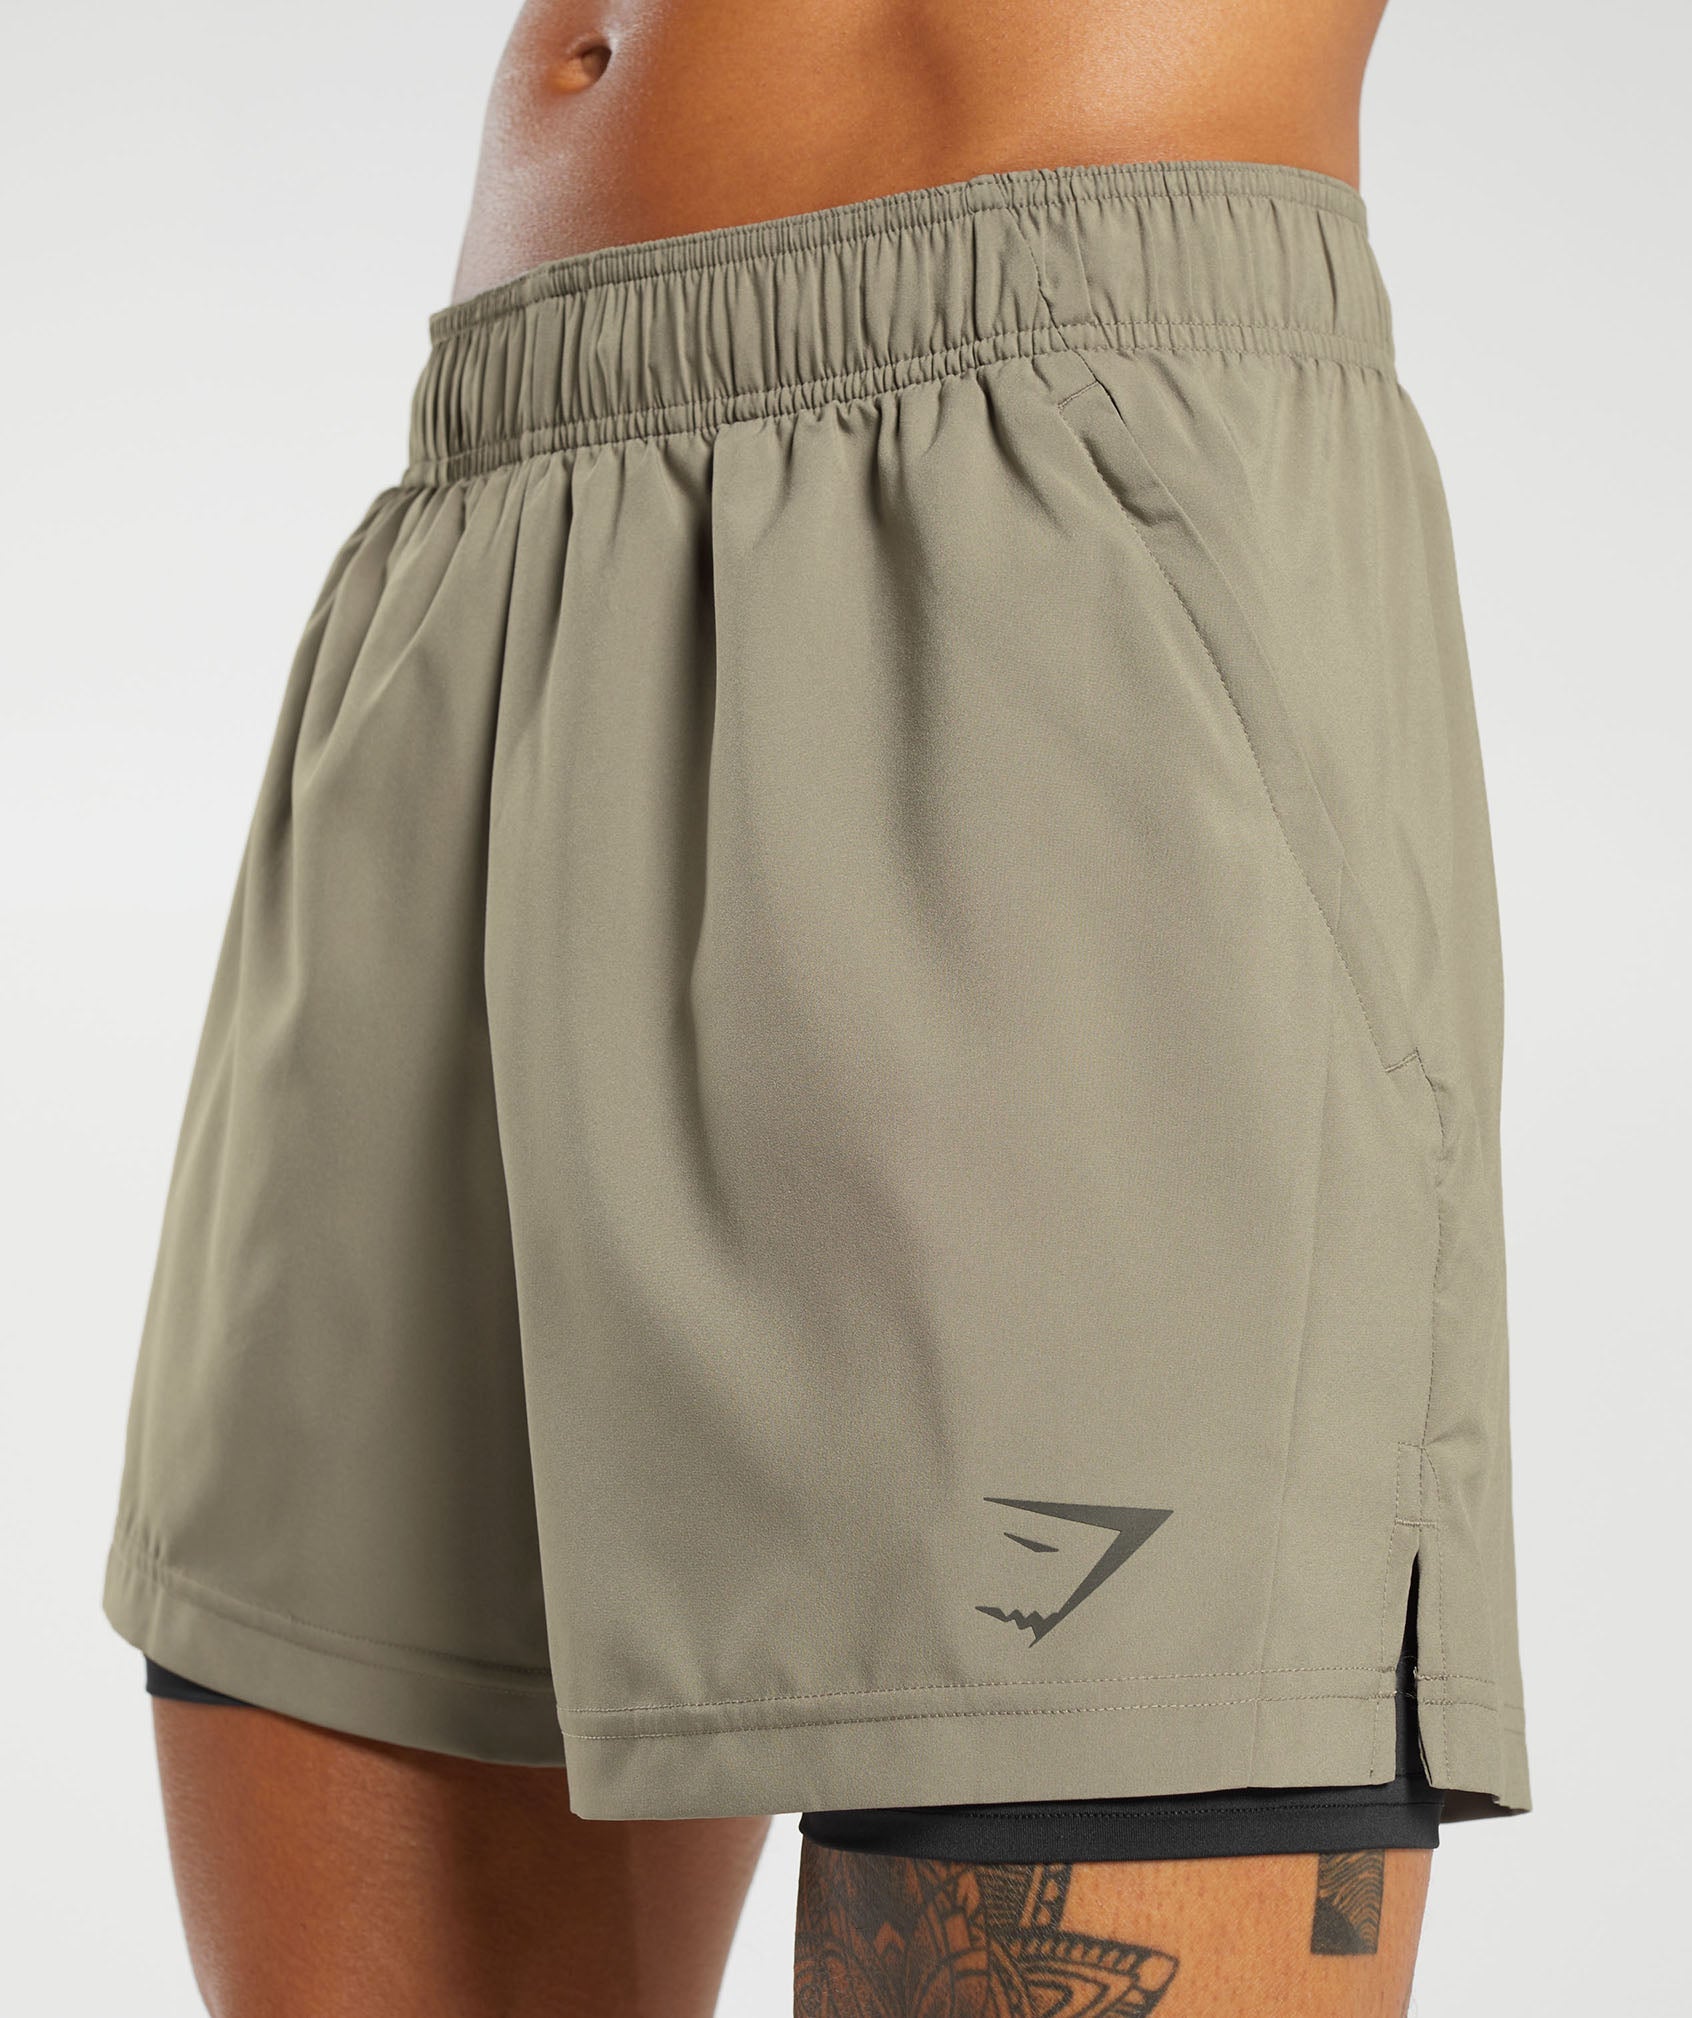 Sport 5" 2 in 1 Shorts in Linen Brown/Black - view 5